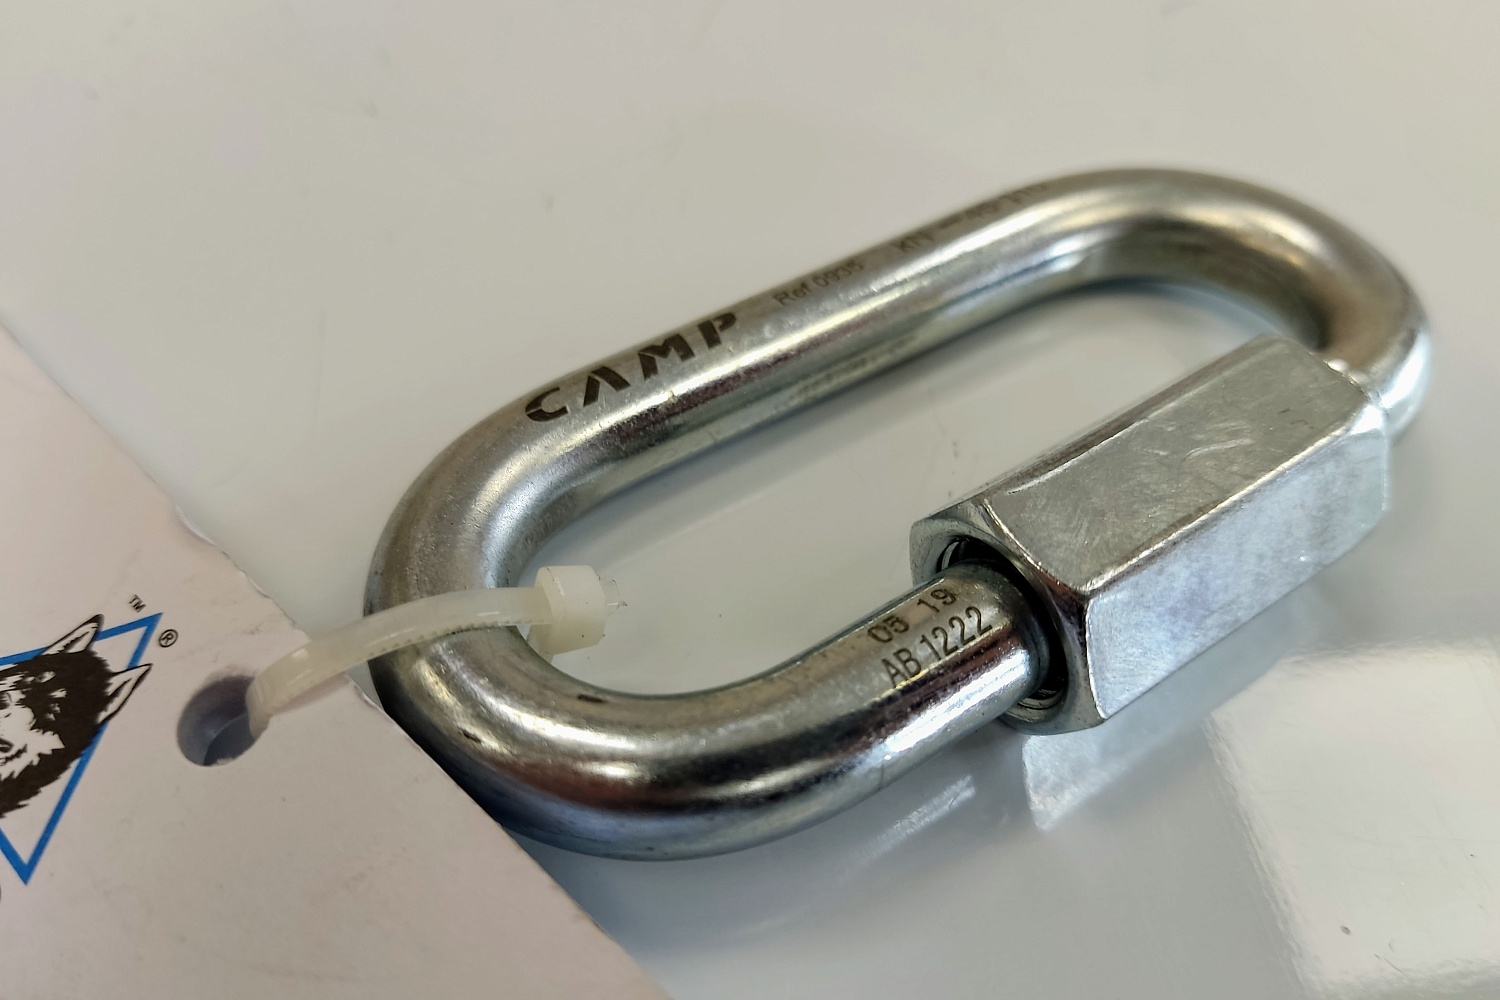 Карабин Oval 10 mm Zinc Plated Quick Links | CAMP